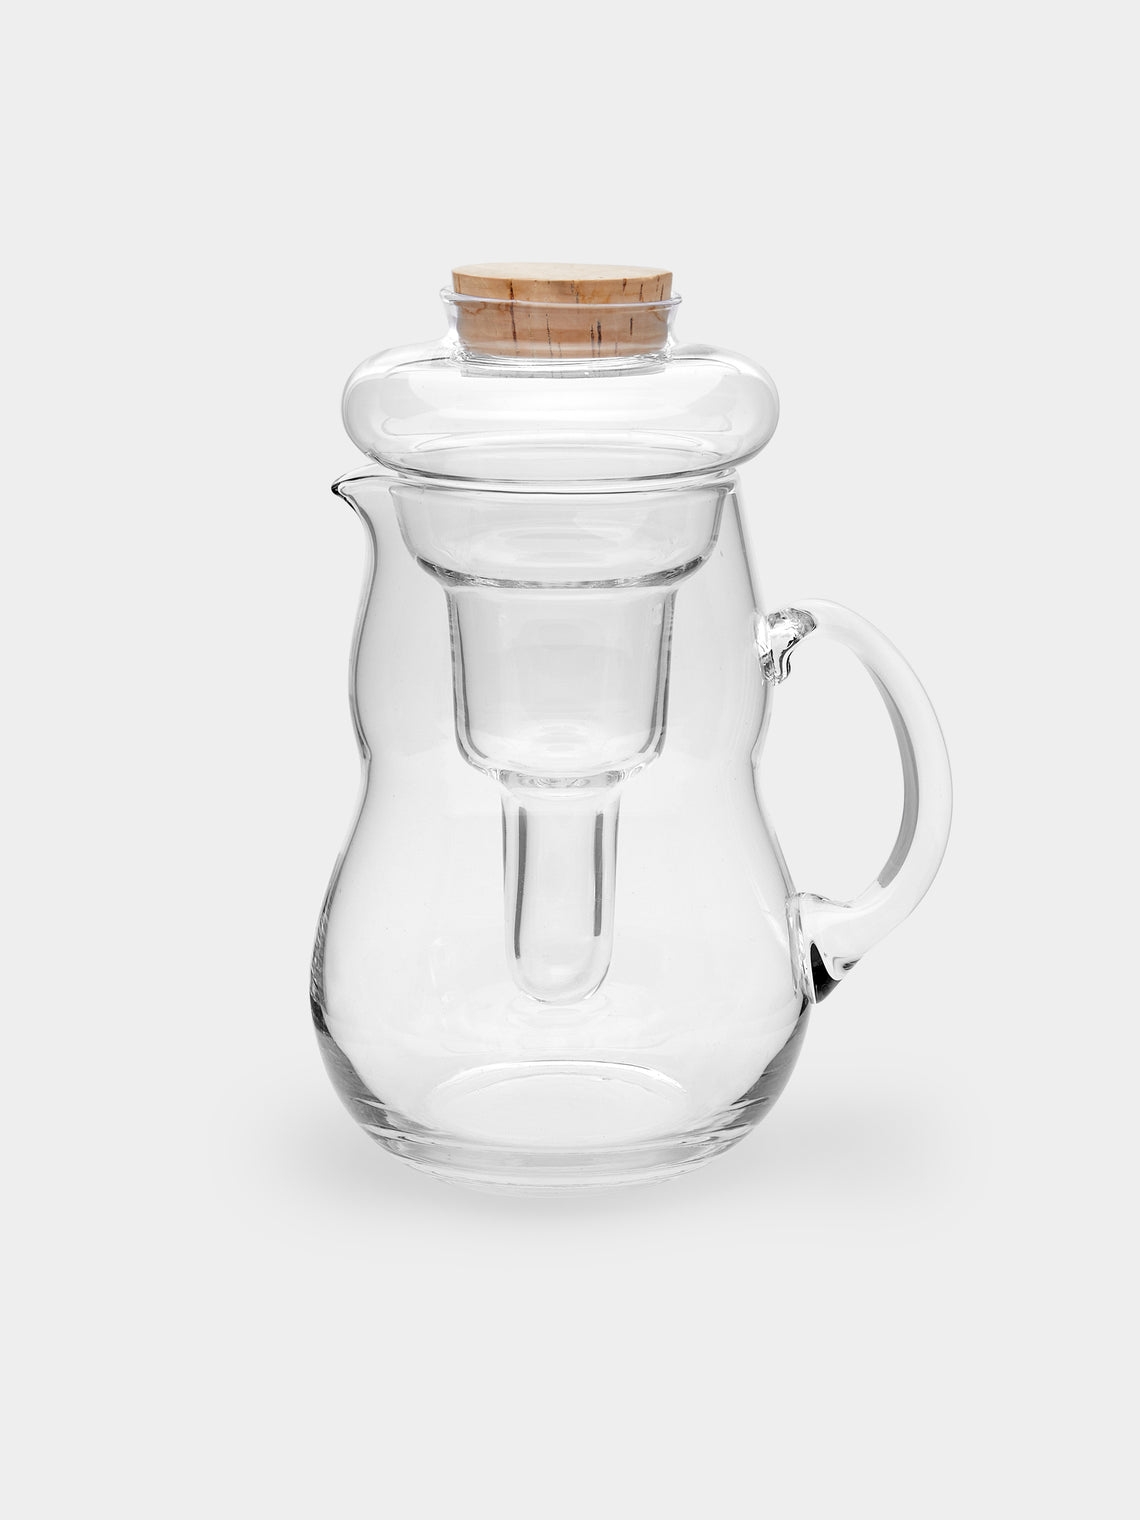 Antique and Vintage - Mid-Century Carl Auböck for Ostovics Culinar Glass Ice Jug -  - ABASK - 